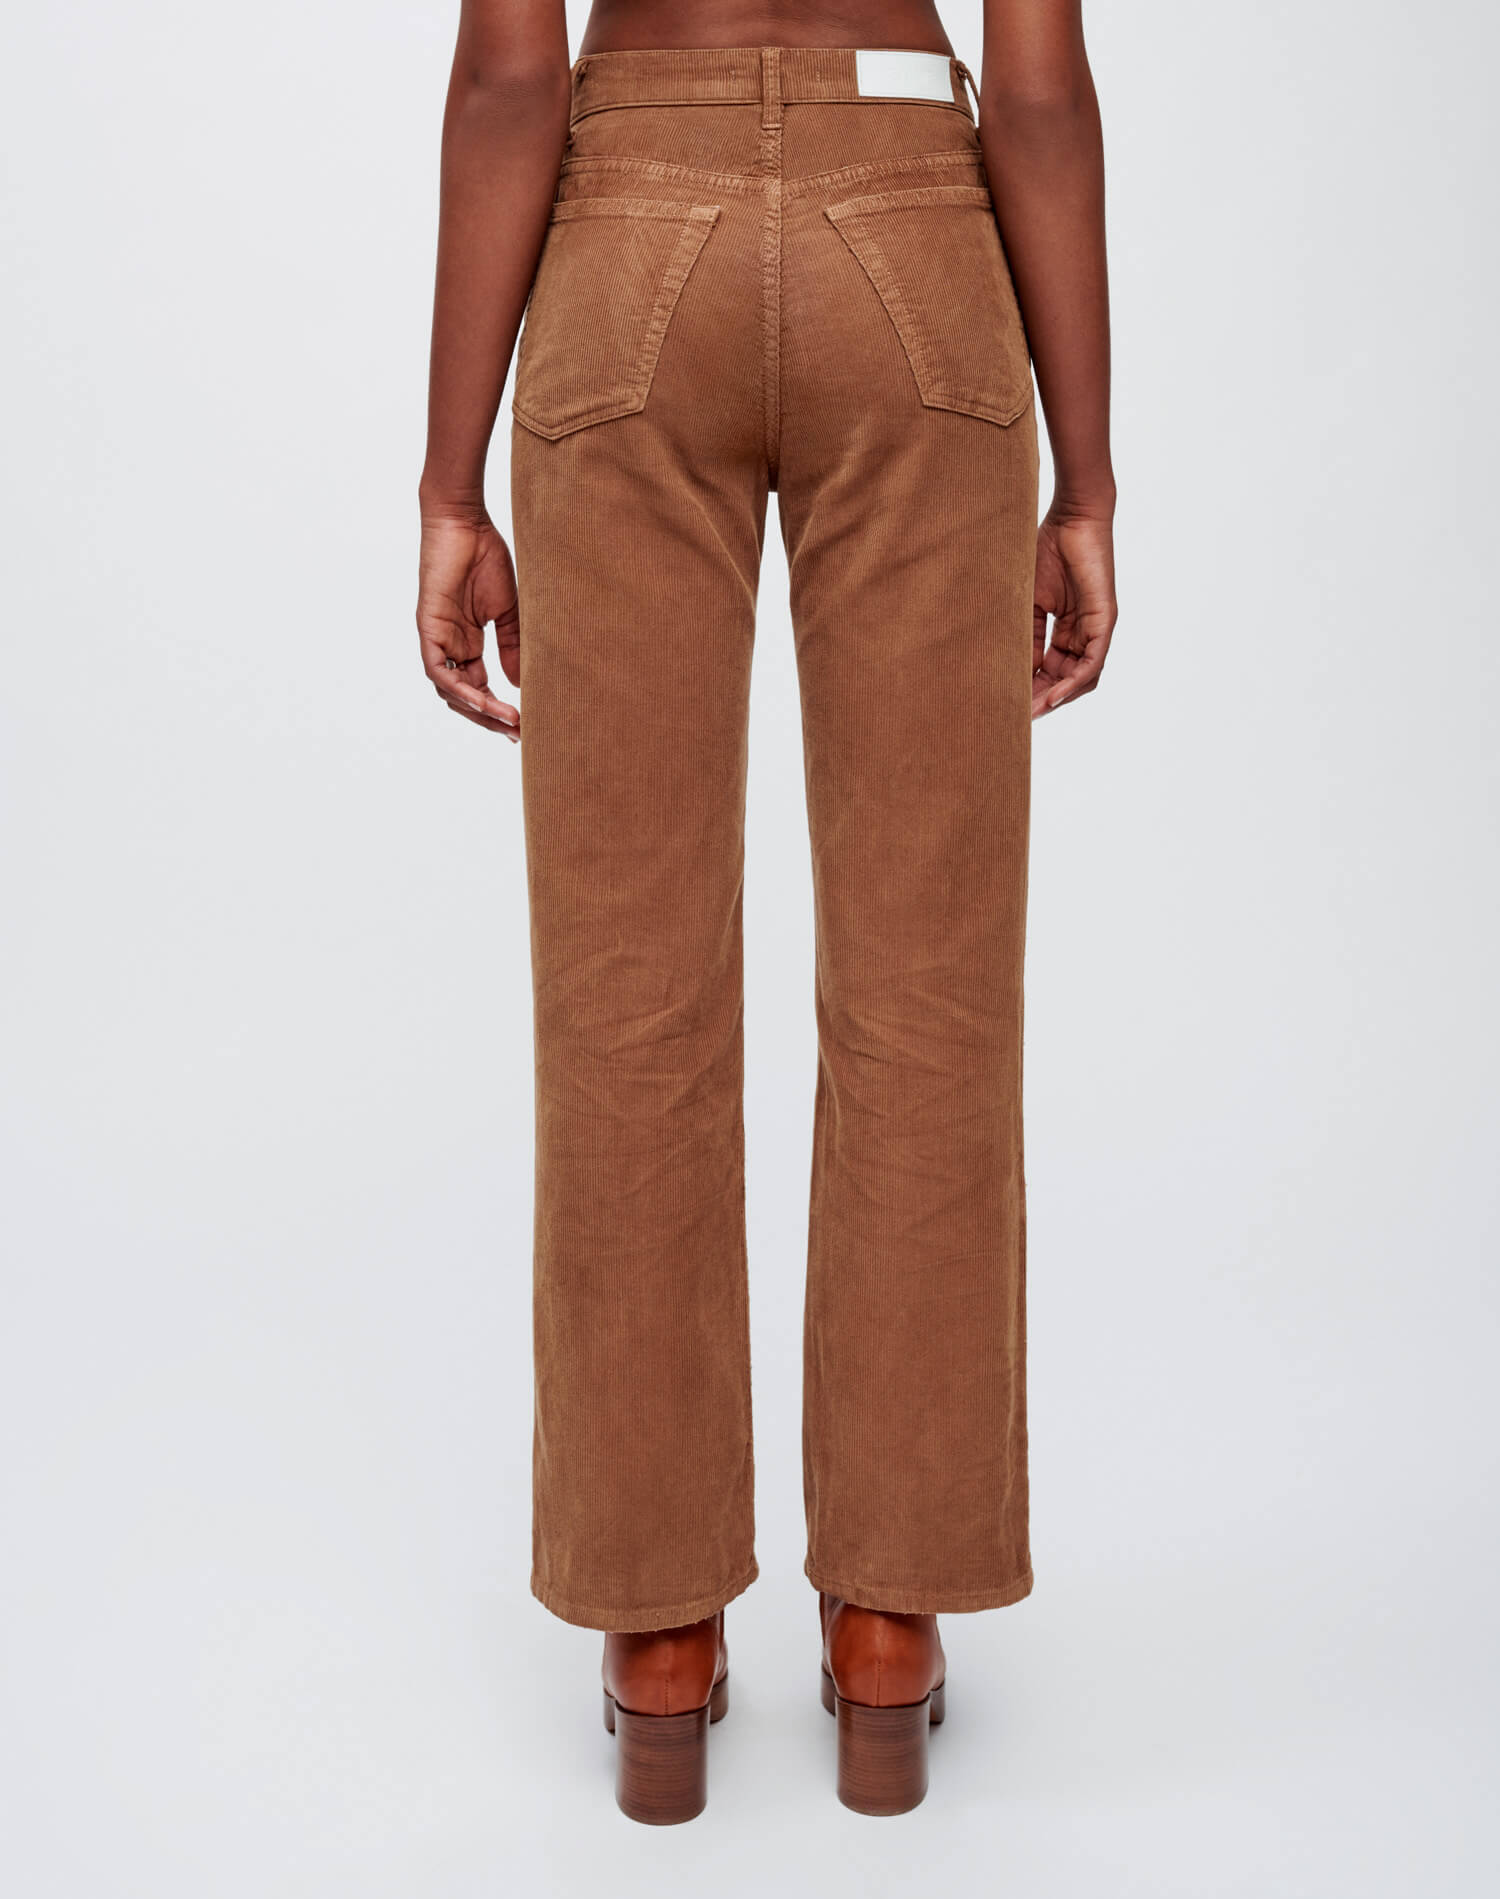 70s Corduroy Loose Flare - Ginger Cord